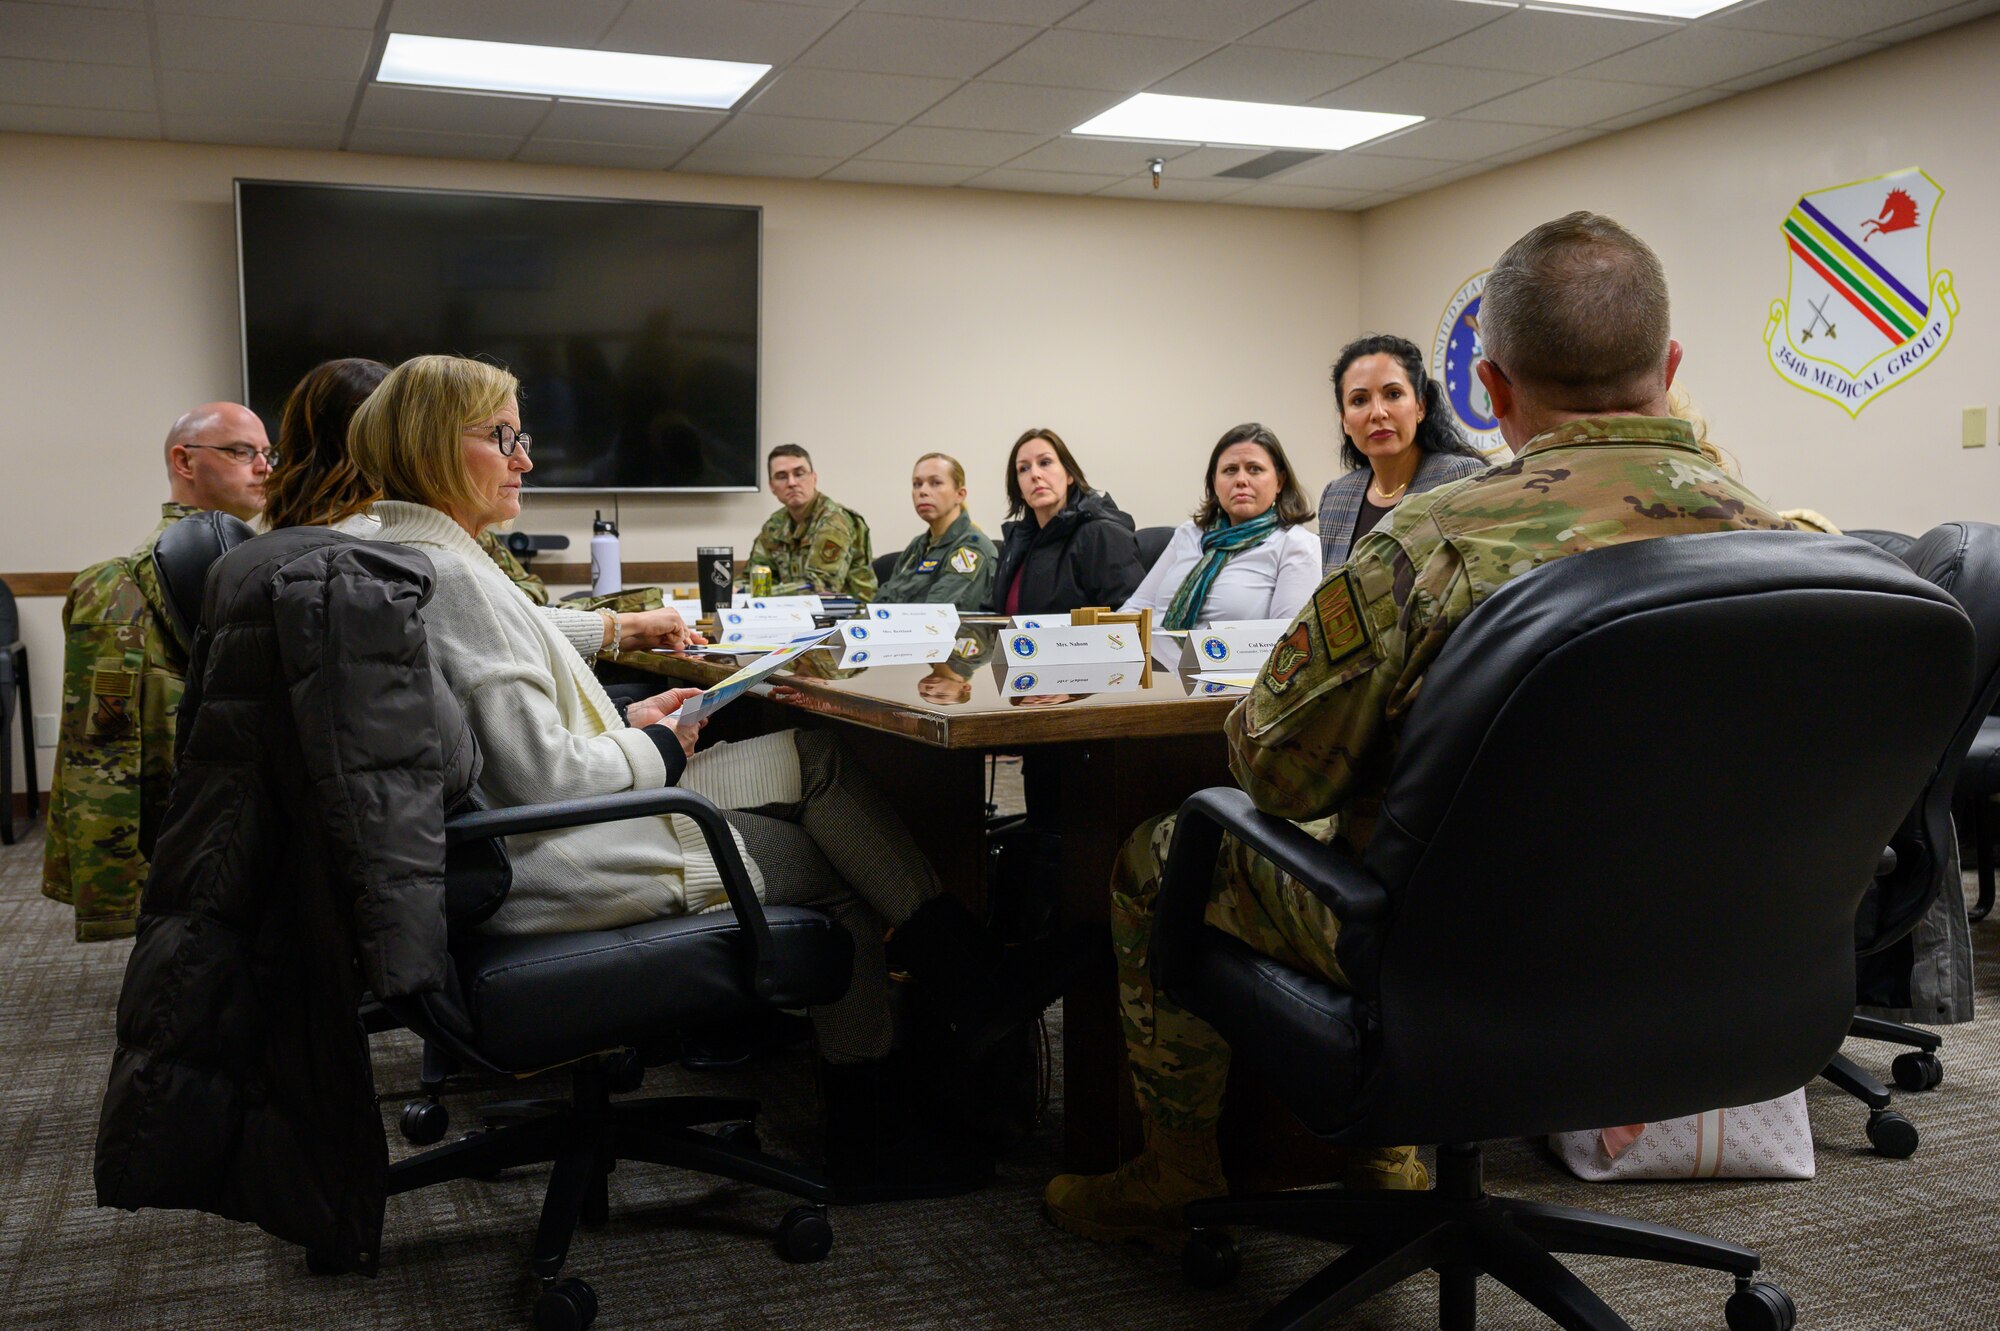 Leaders from the 354th Medical Group meet with the Pacific Air Forces, Eleventh Air Force and 354th Fighter Wing leadership spouses during a PACAF leadership visit to Eielson Air Force Base, Alaska, Jan. 4, 2023.